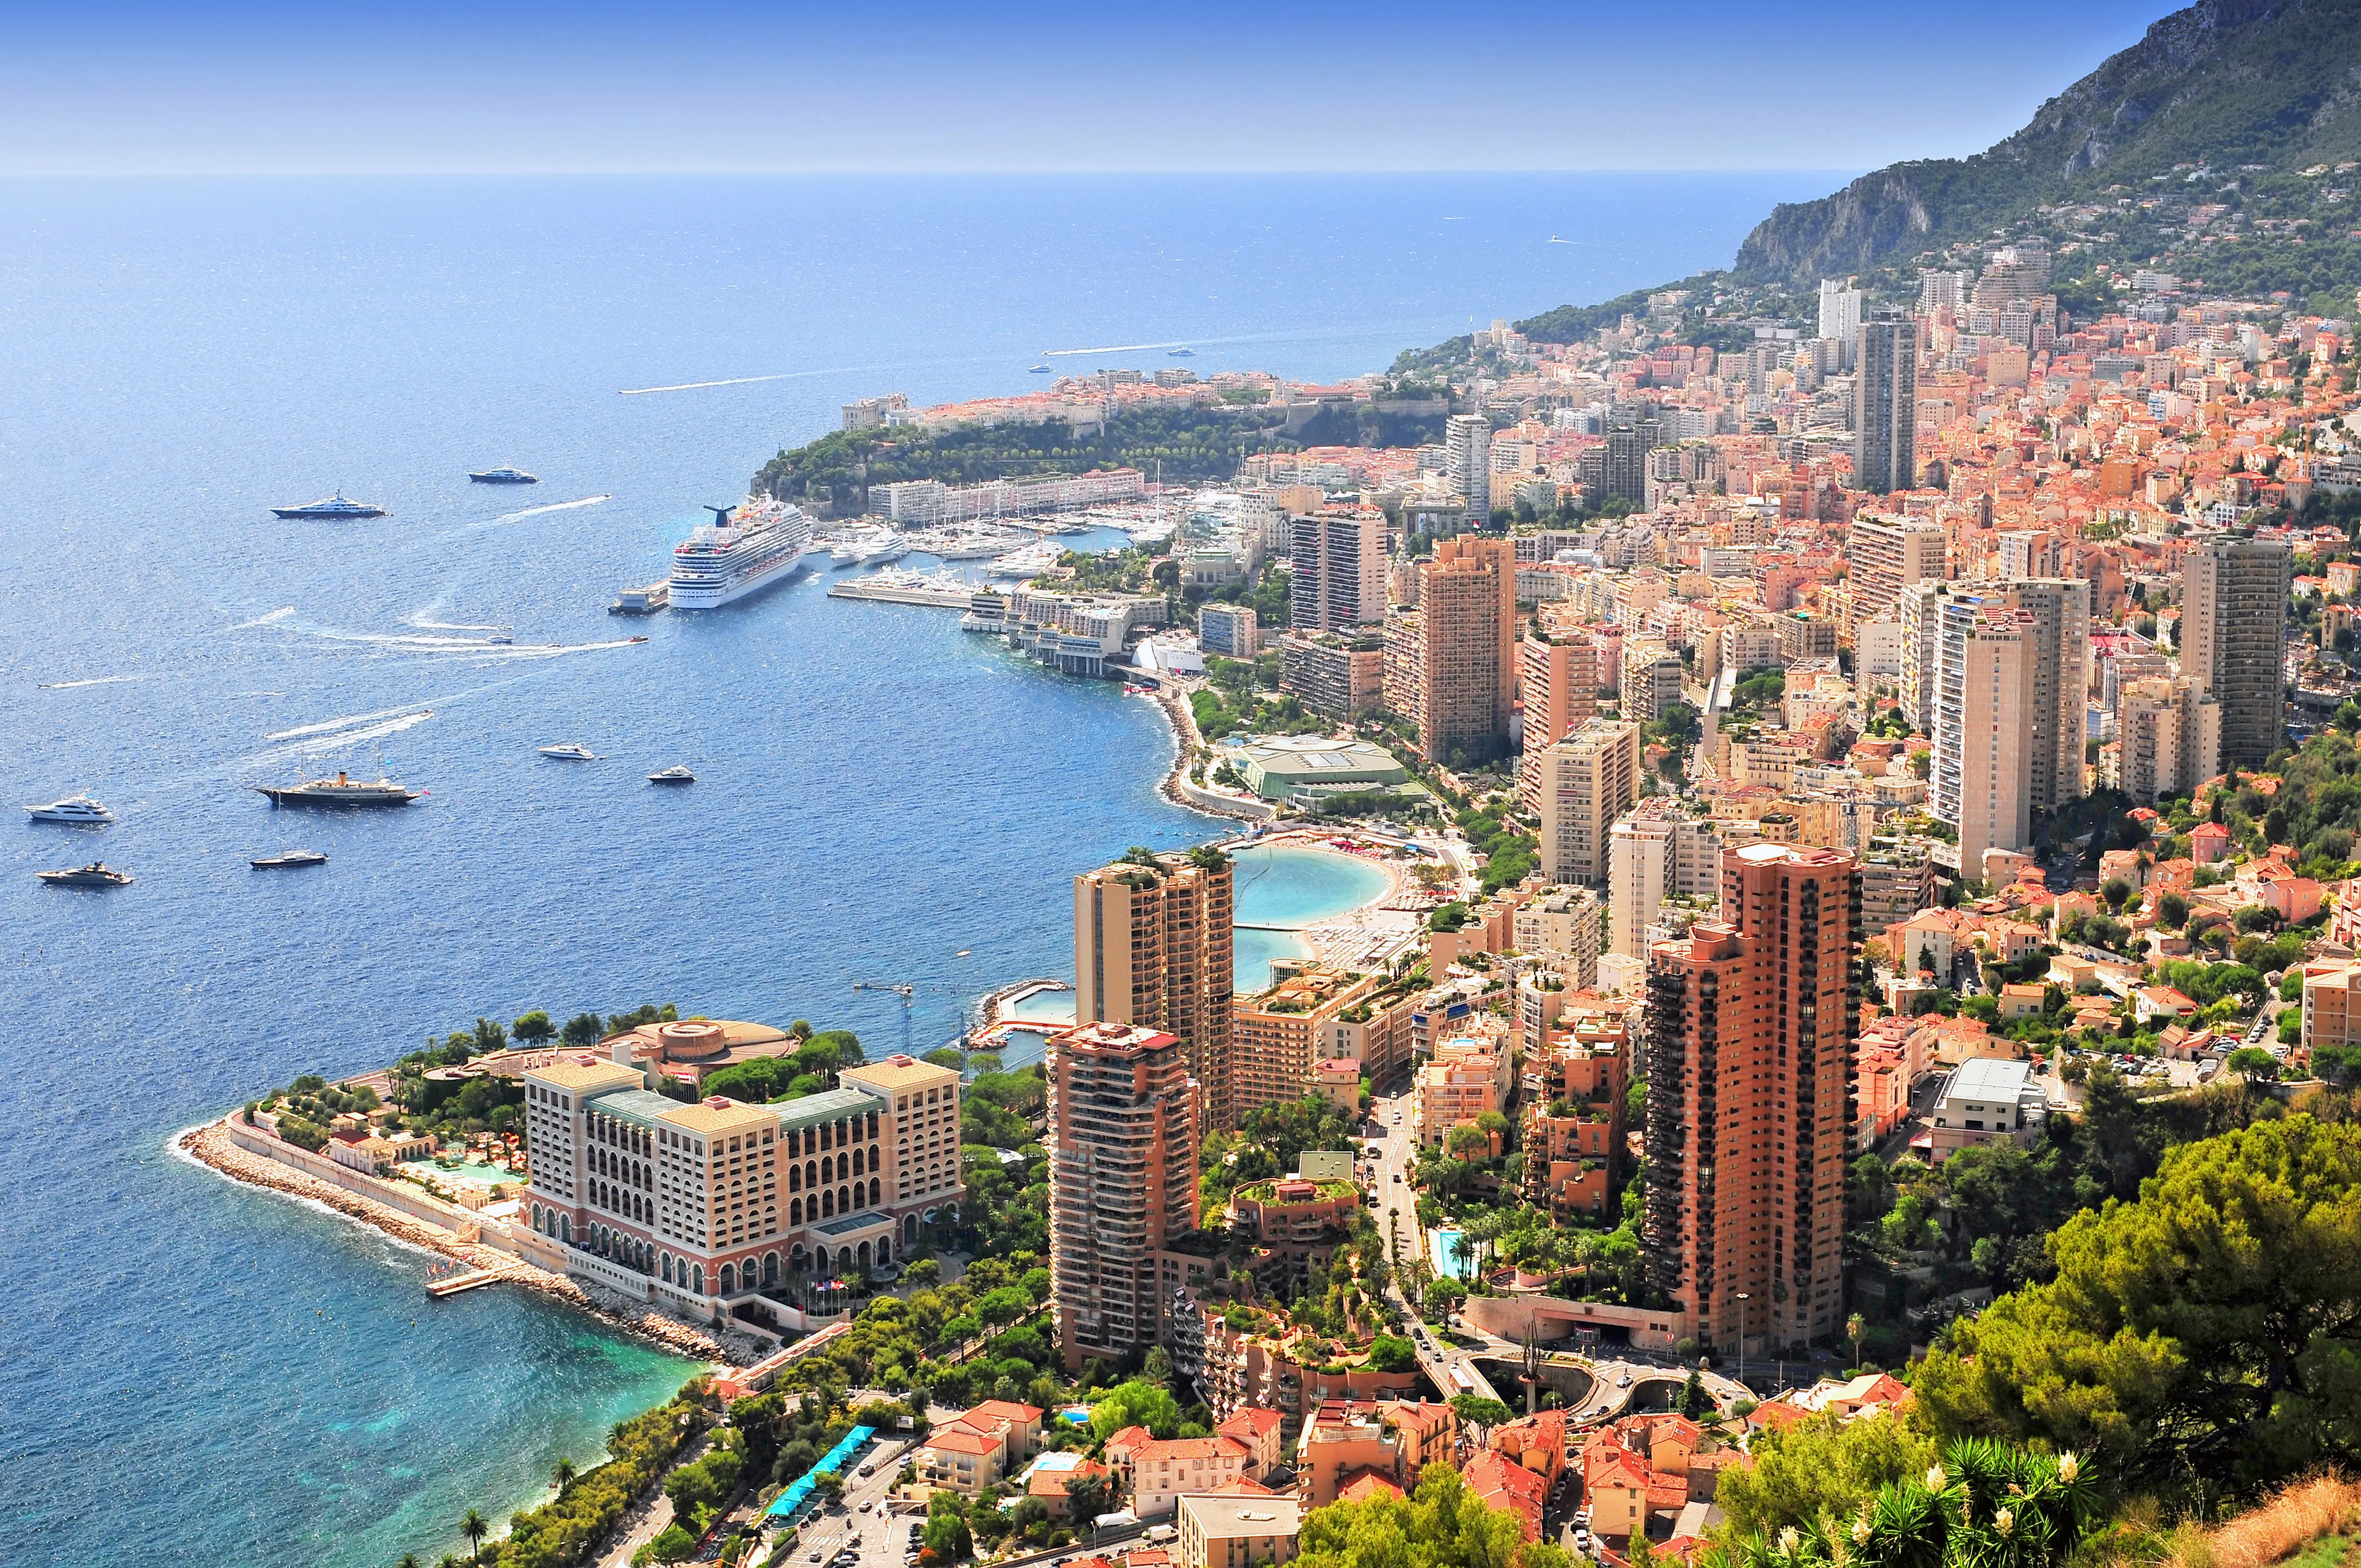 1-Day Monaco Shopping & Nightlife Adventure with Friends